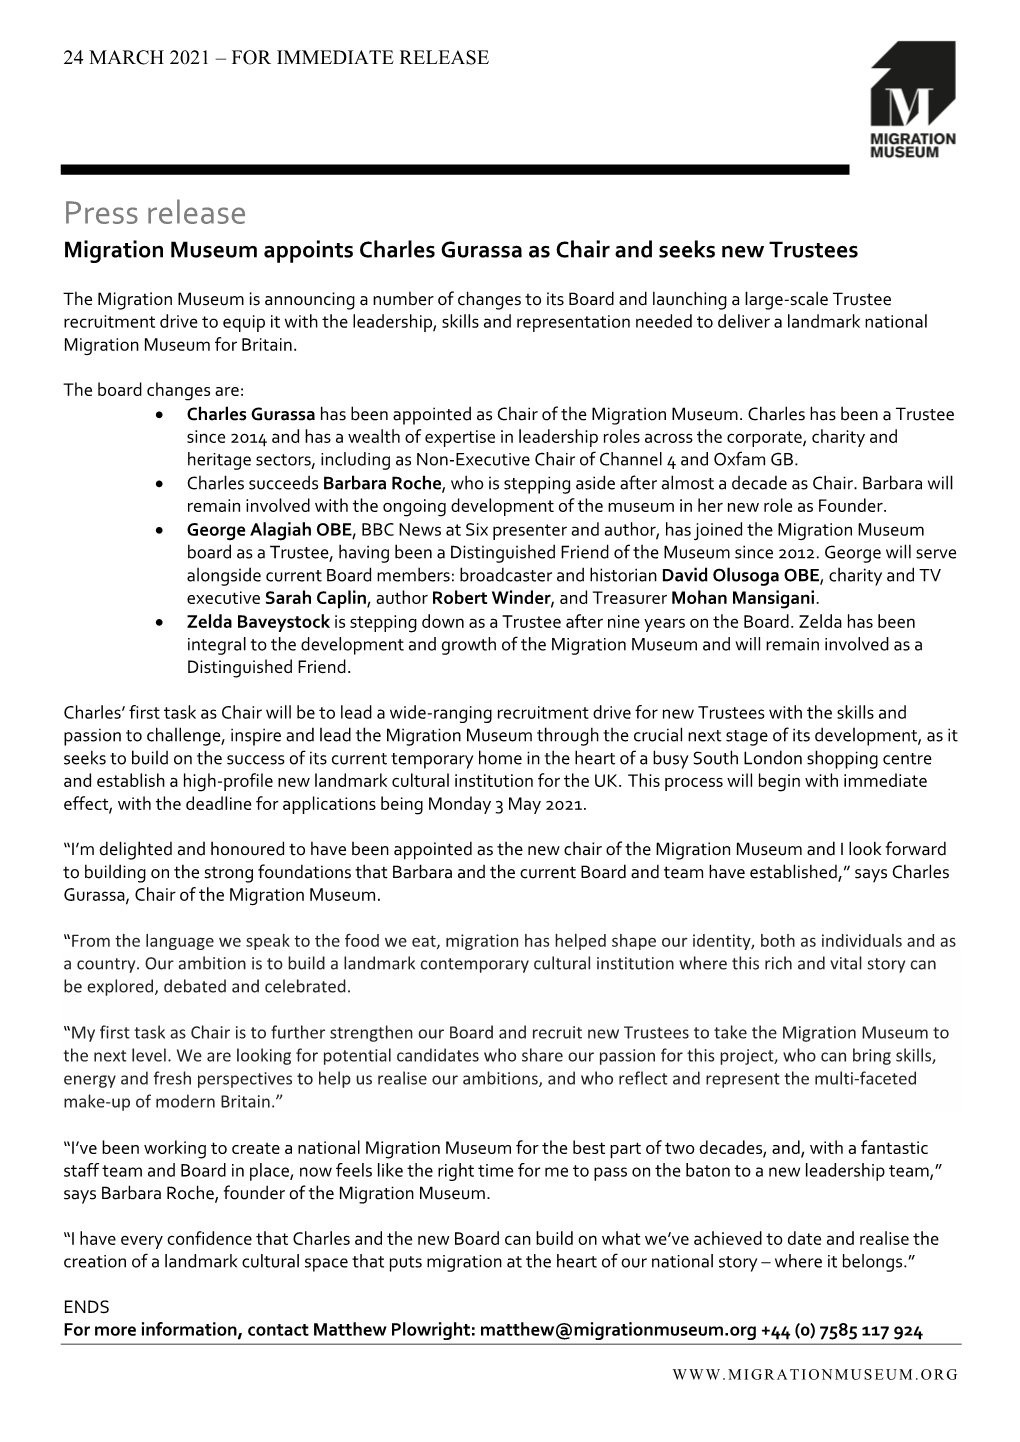 Migration Museum Appoints Charles Gurassa As Chair and Seeks New Trustees